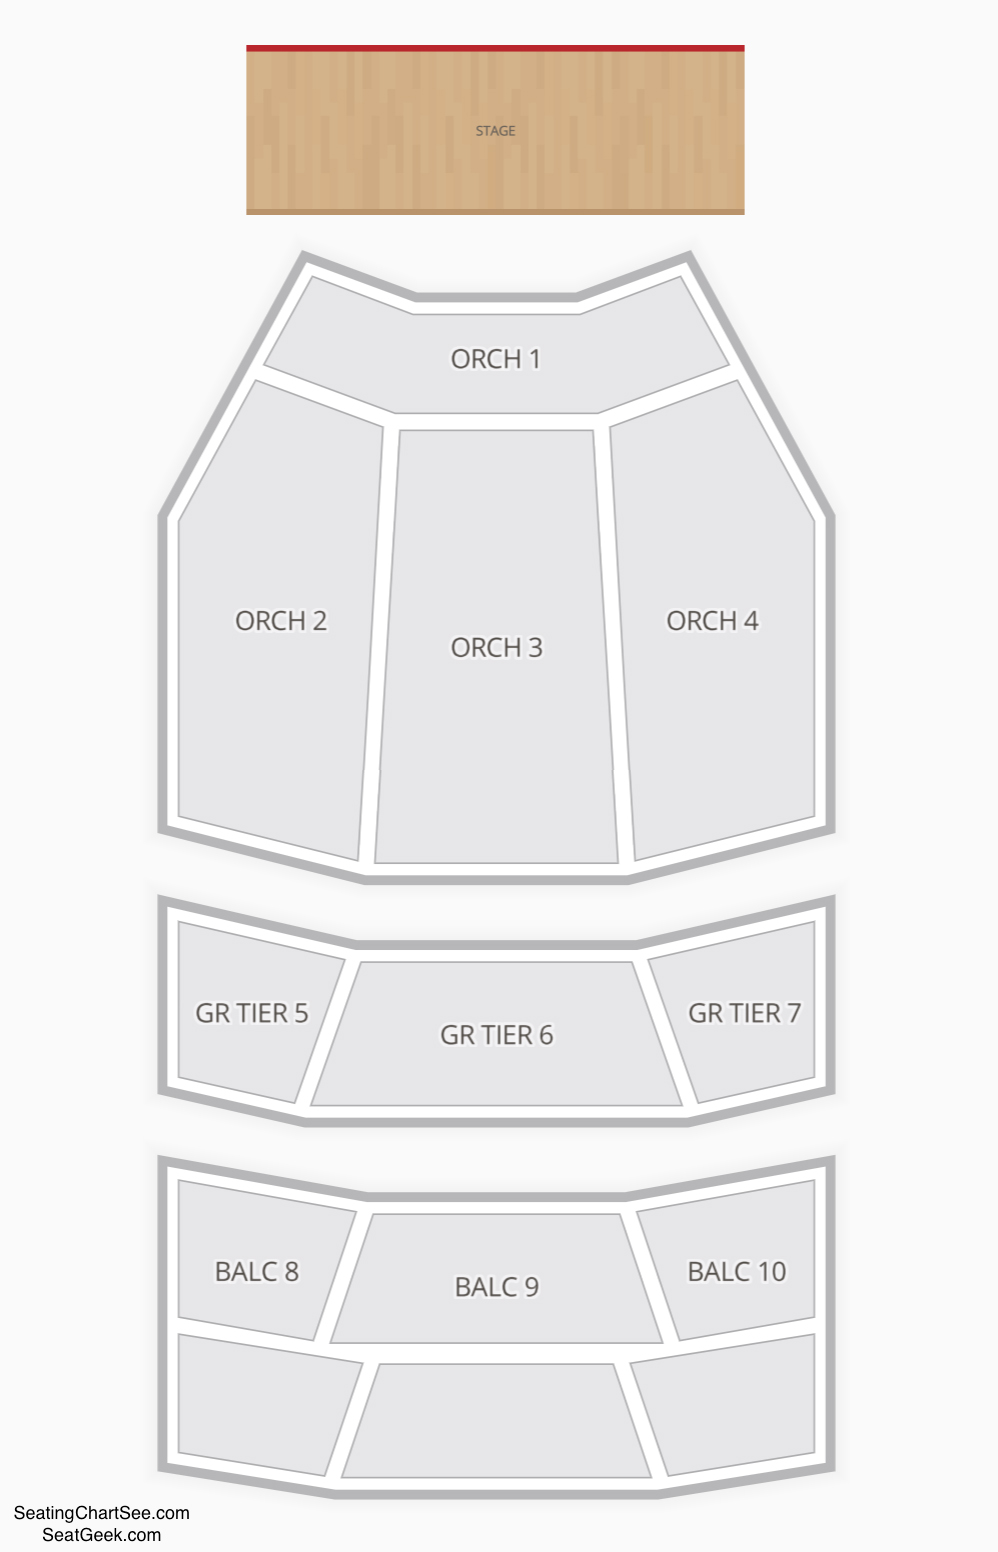 Durham Performing Arts Center (DPAC) Seating Chart Seating Charts